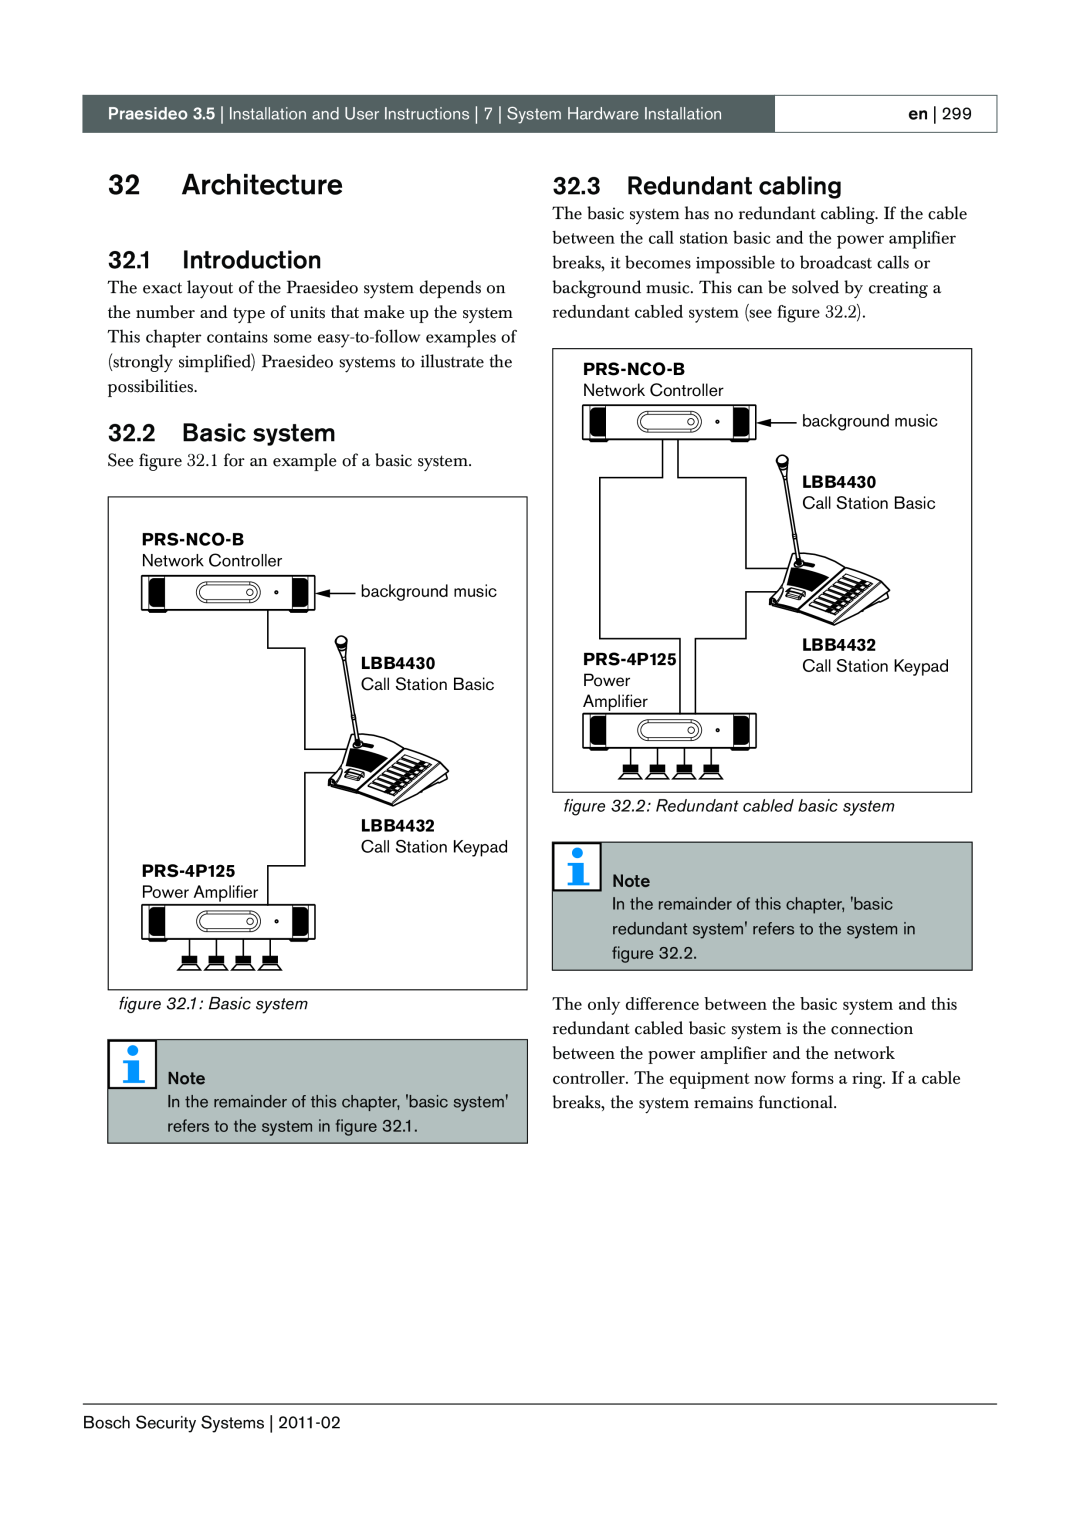 Bosch Appliances 3.5 manual Architecture, 32.1Introduction, 32.2Basic system, 32.3Redundant cabling, 1: Basic system 